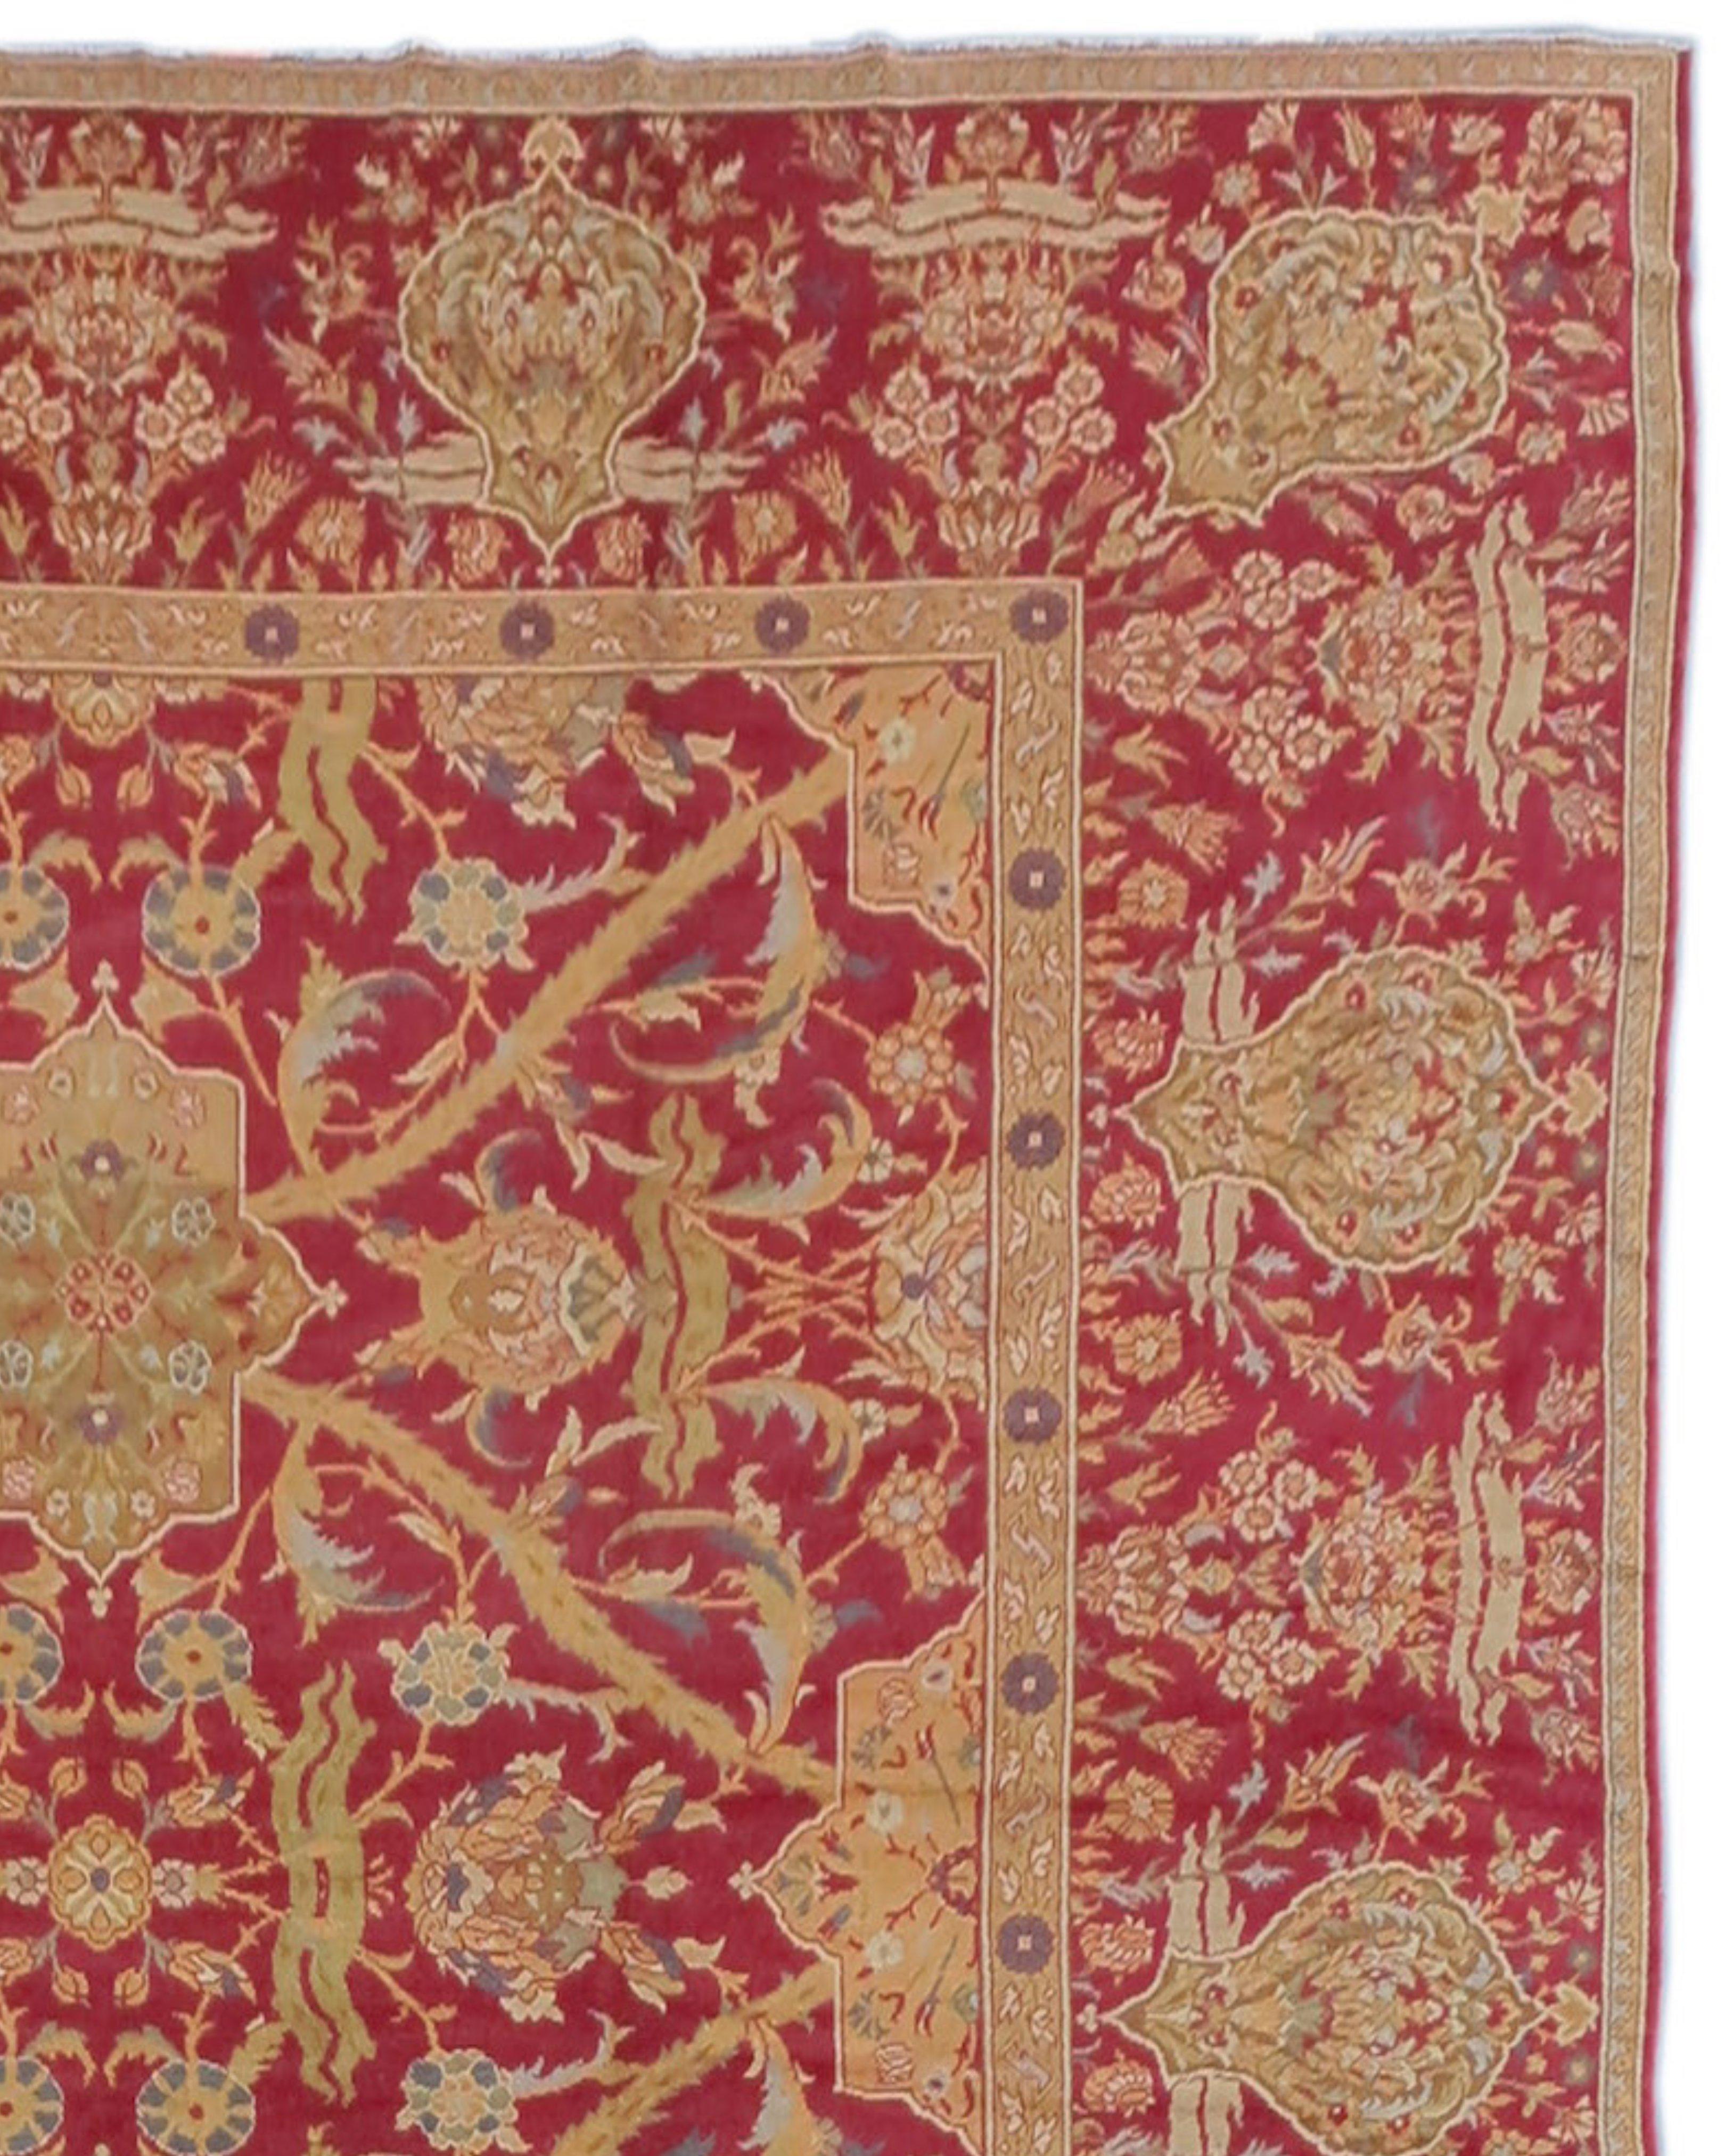 Antique Ottoman-Style Carpet, Late 19th Century In Excellent Condition For Sale In San Francisco, CA